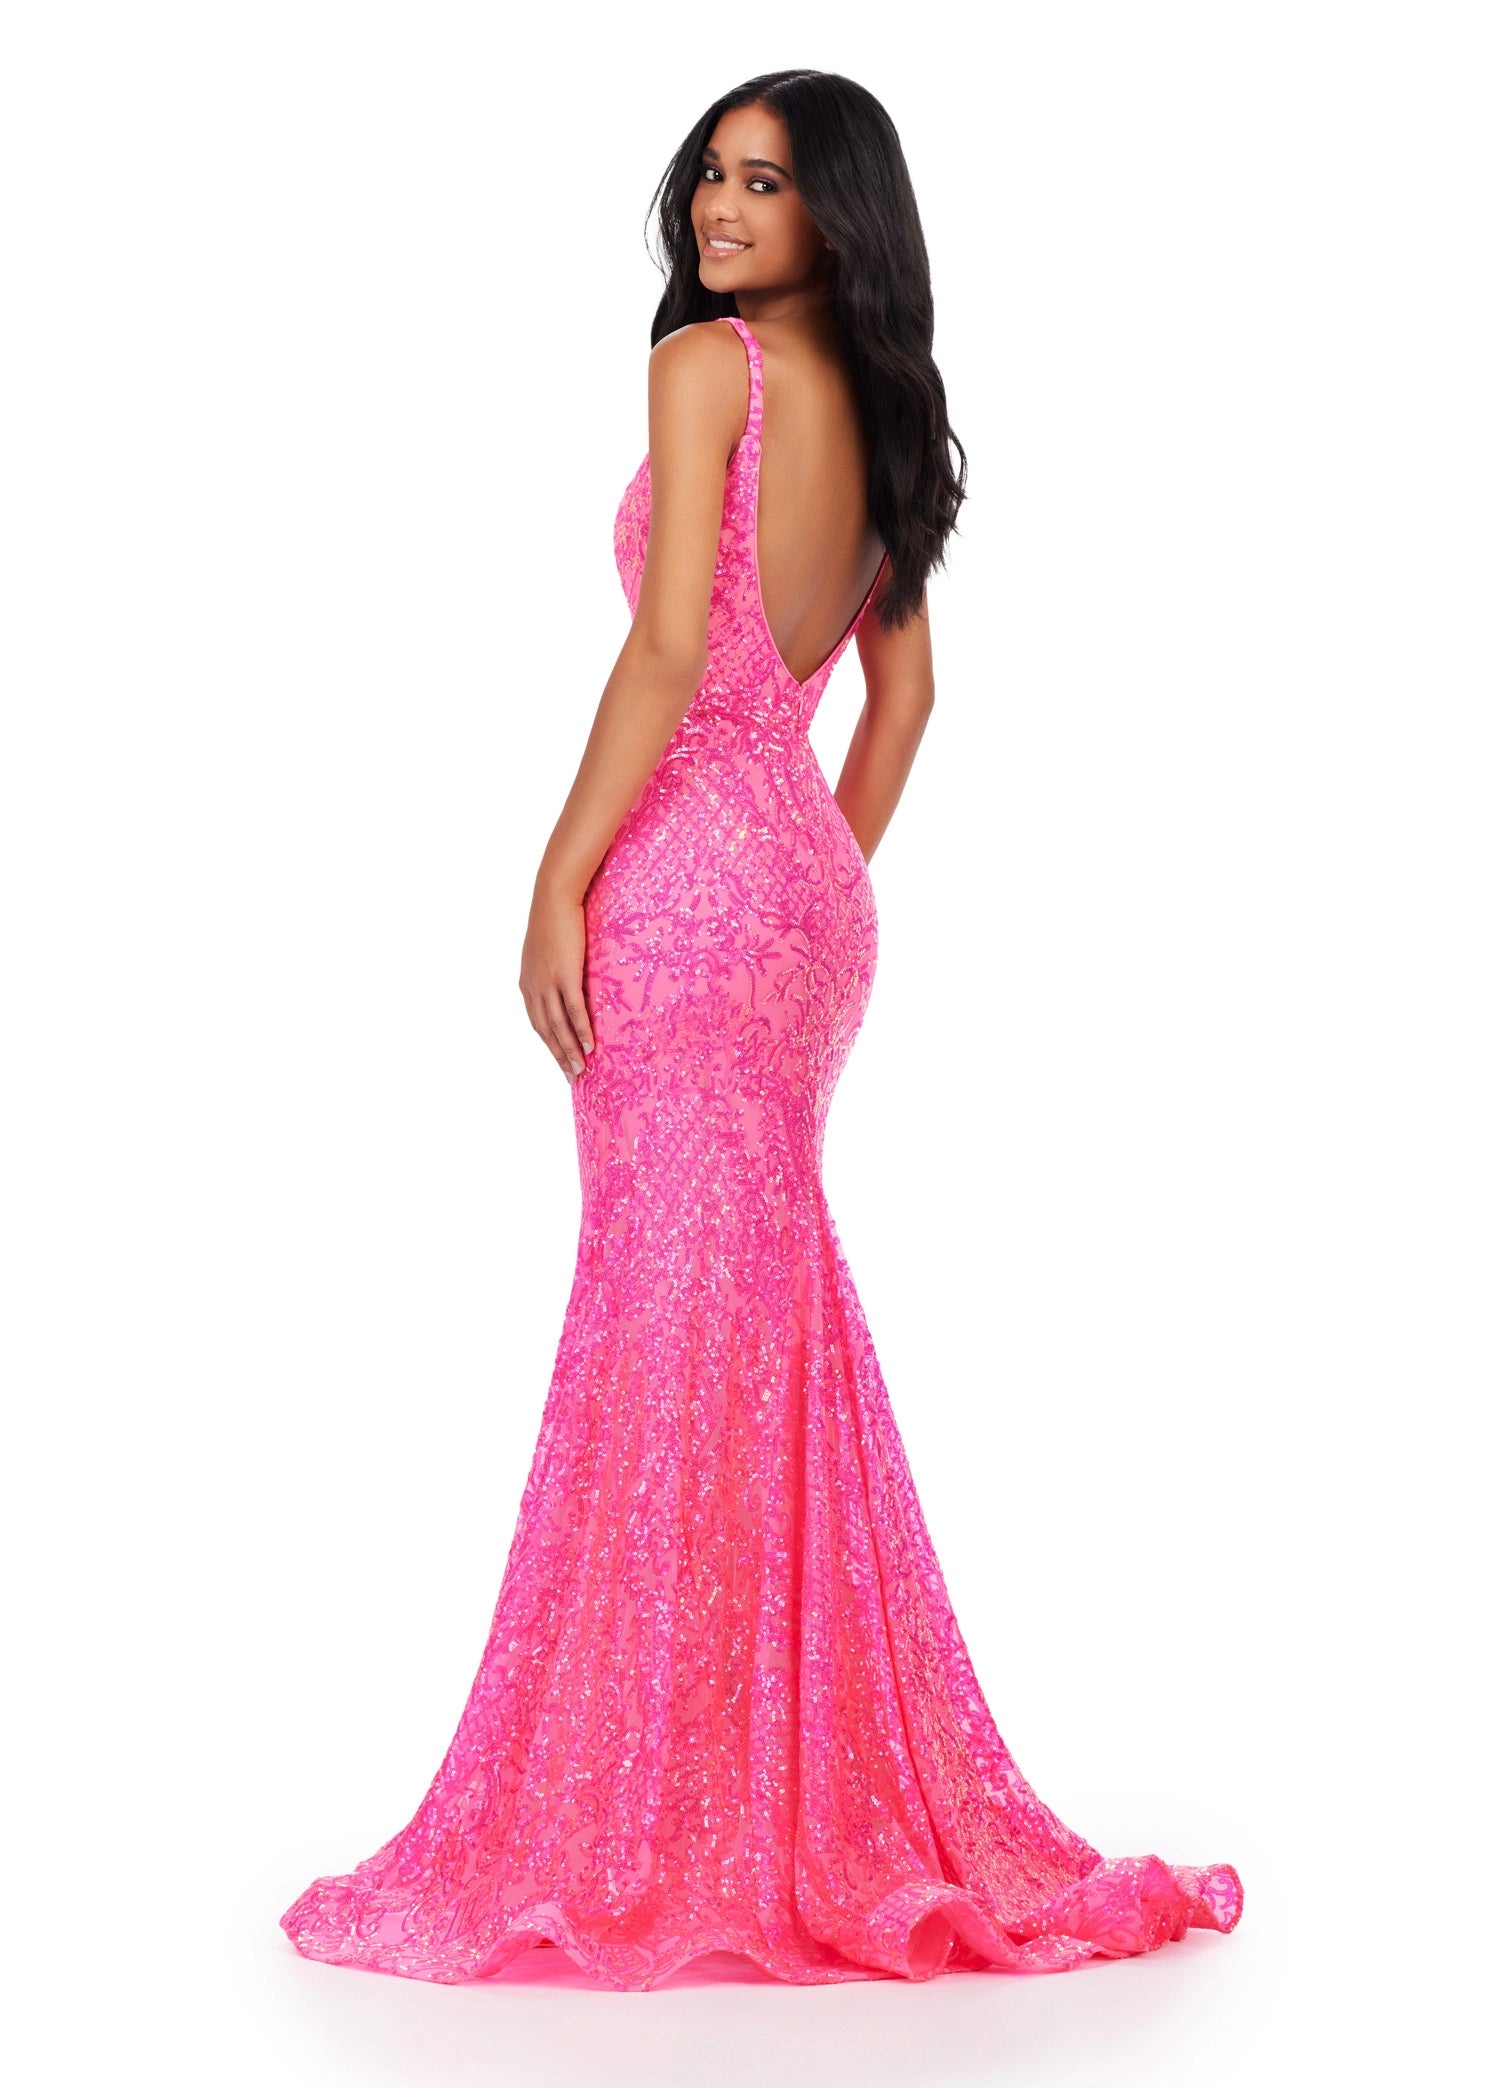 Ashley Lauren 11342 Long Prom Sequin Spaghetti Strap Prom Dress with Lace Up Back Formal Pageant 14 / Gold